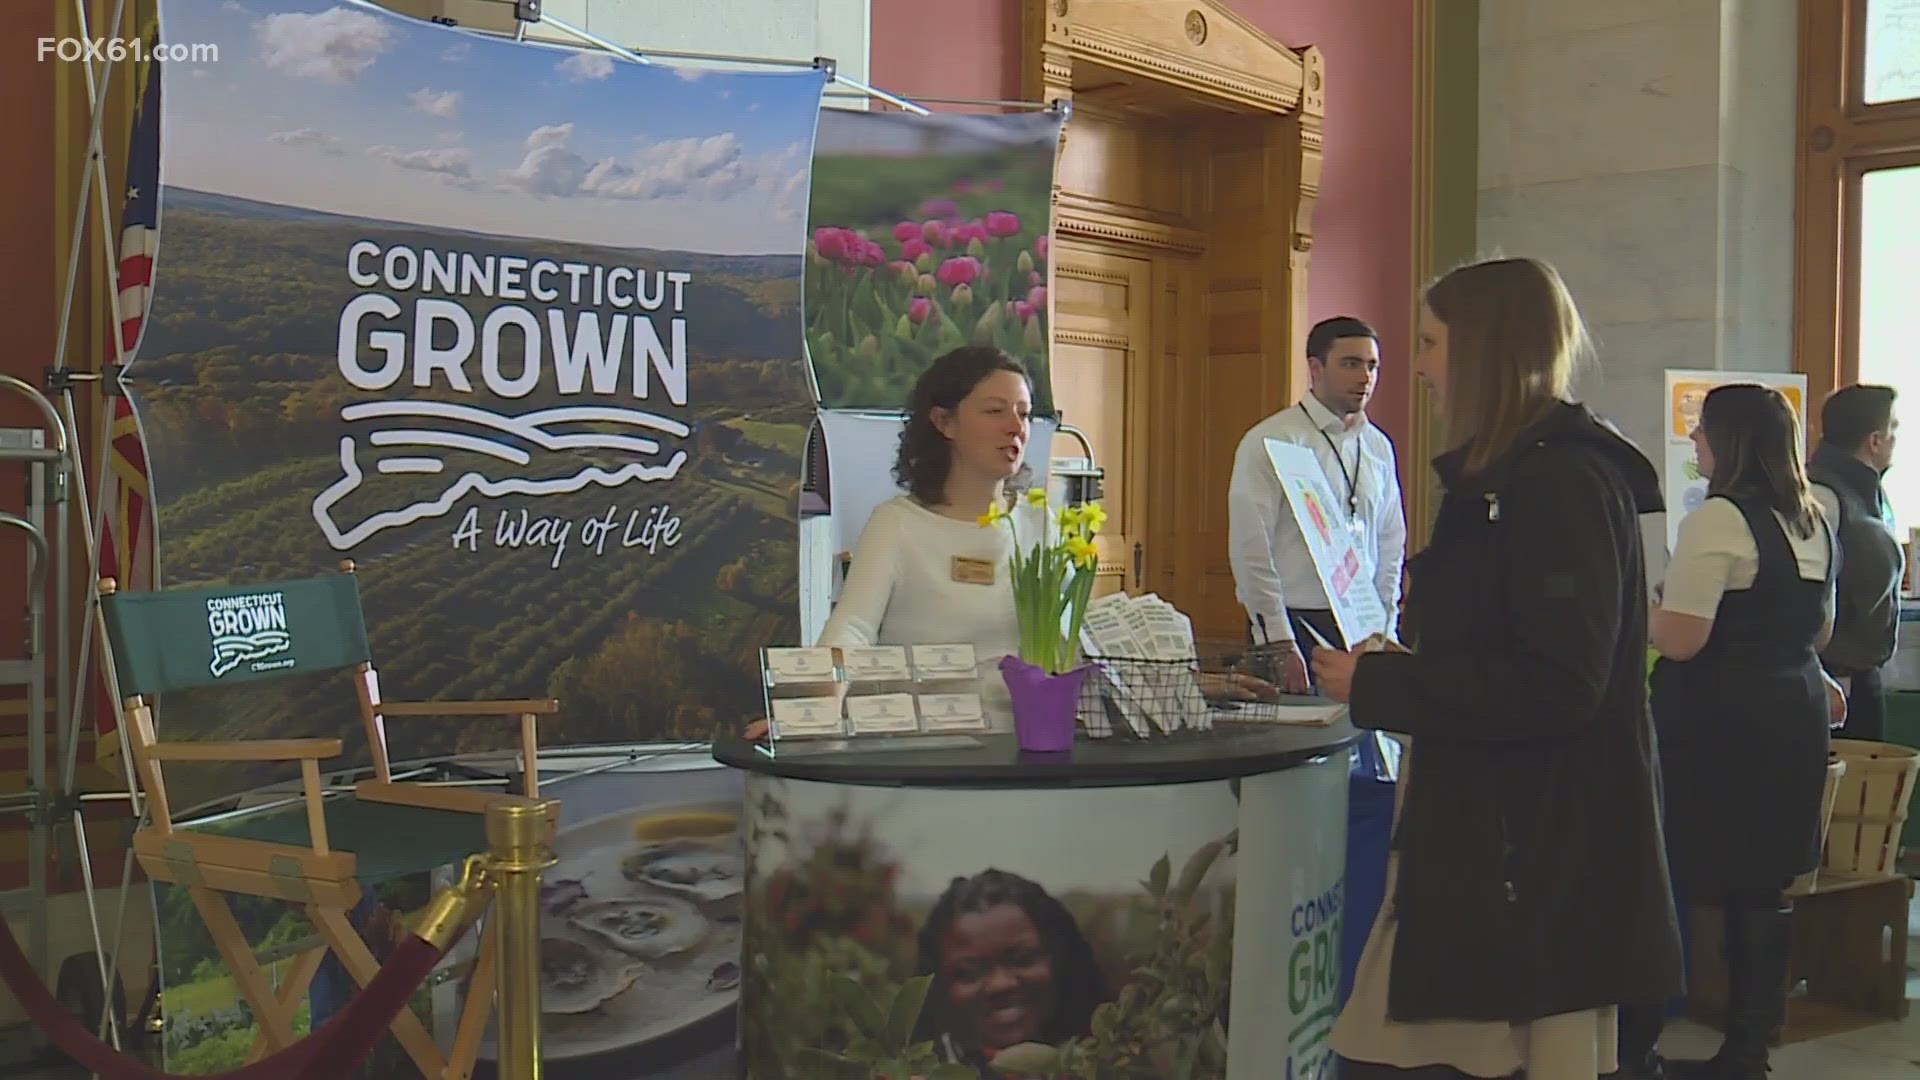 The event spotlights everything in the farming community in Connecticut.